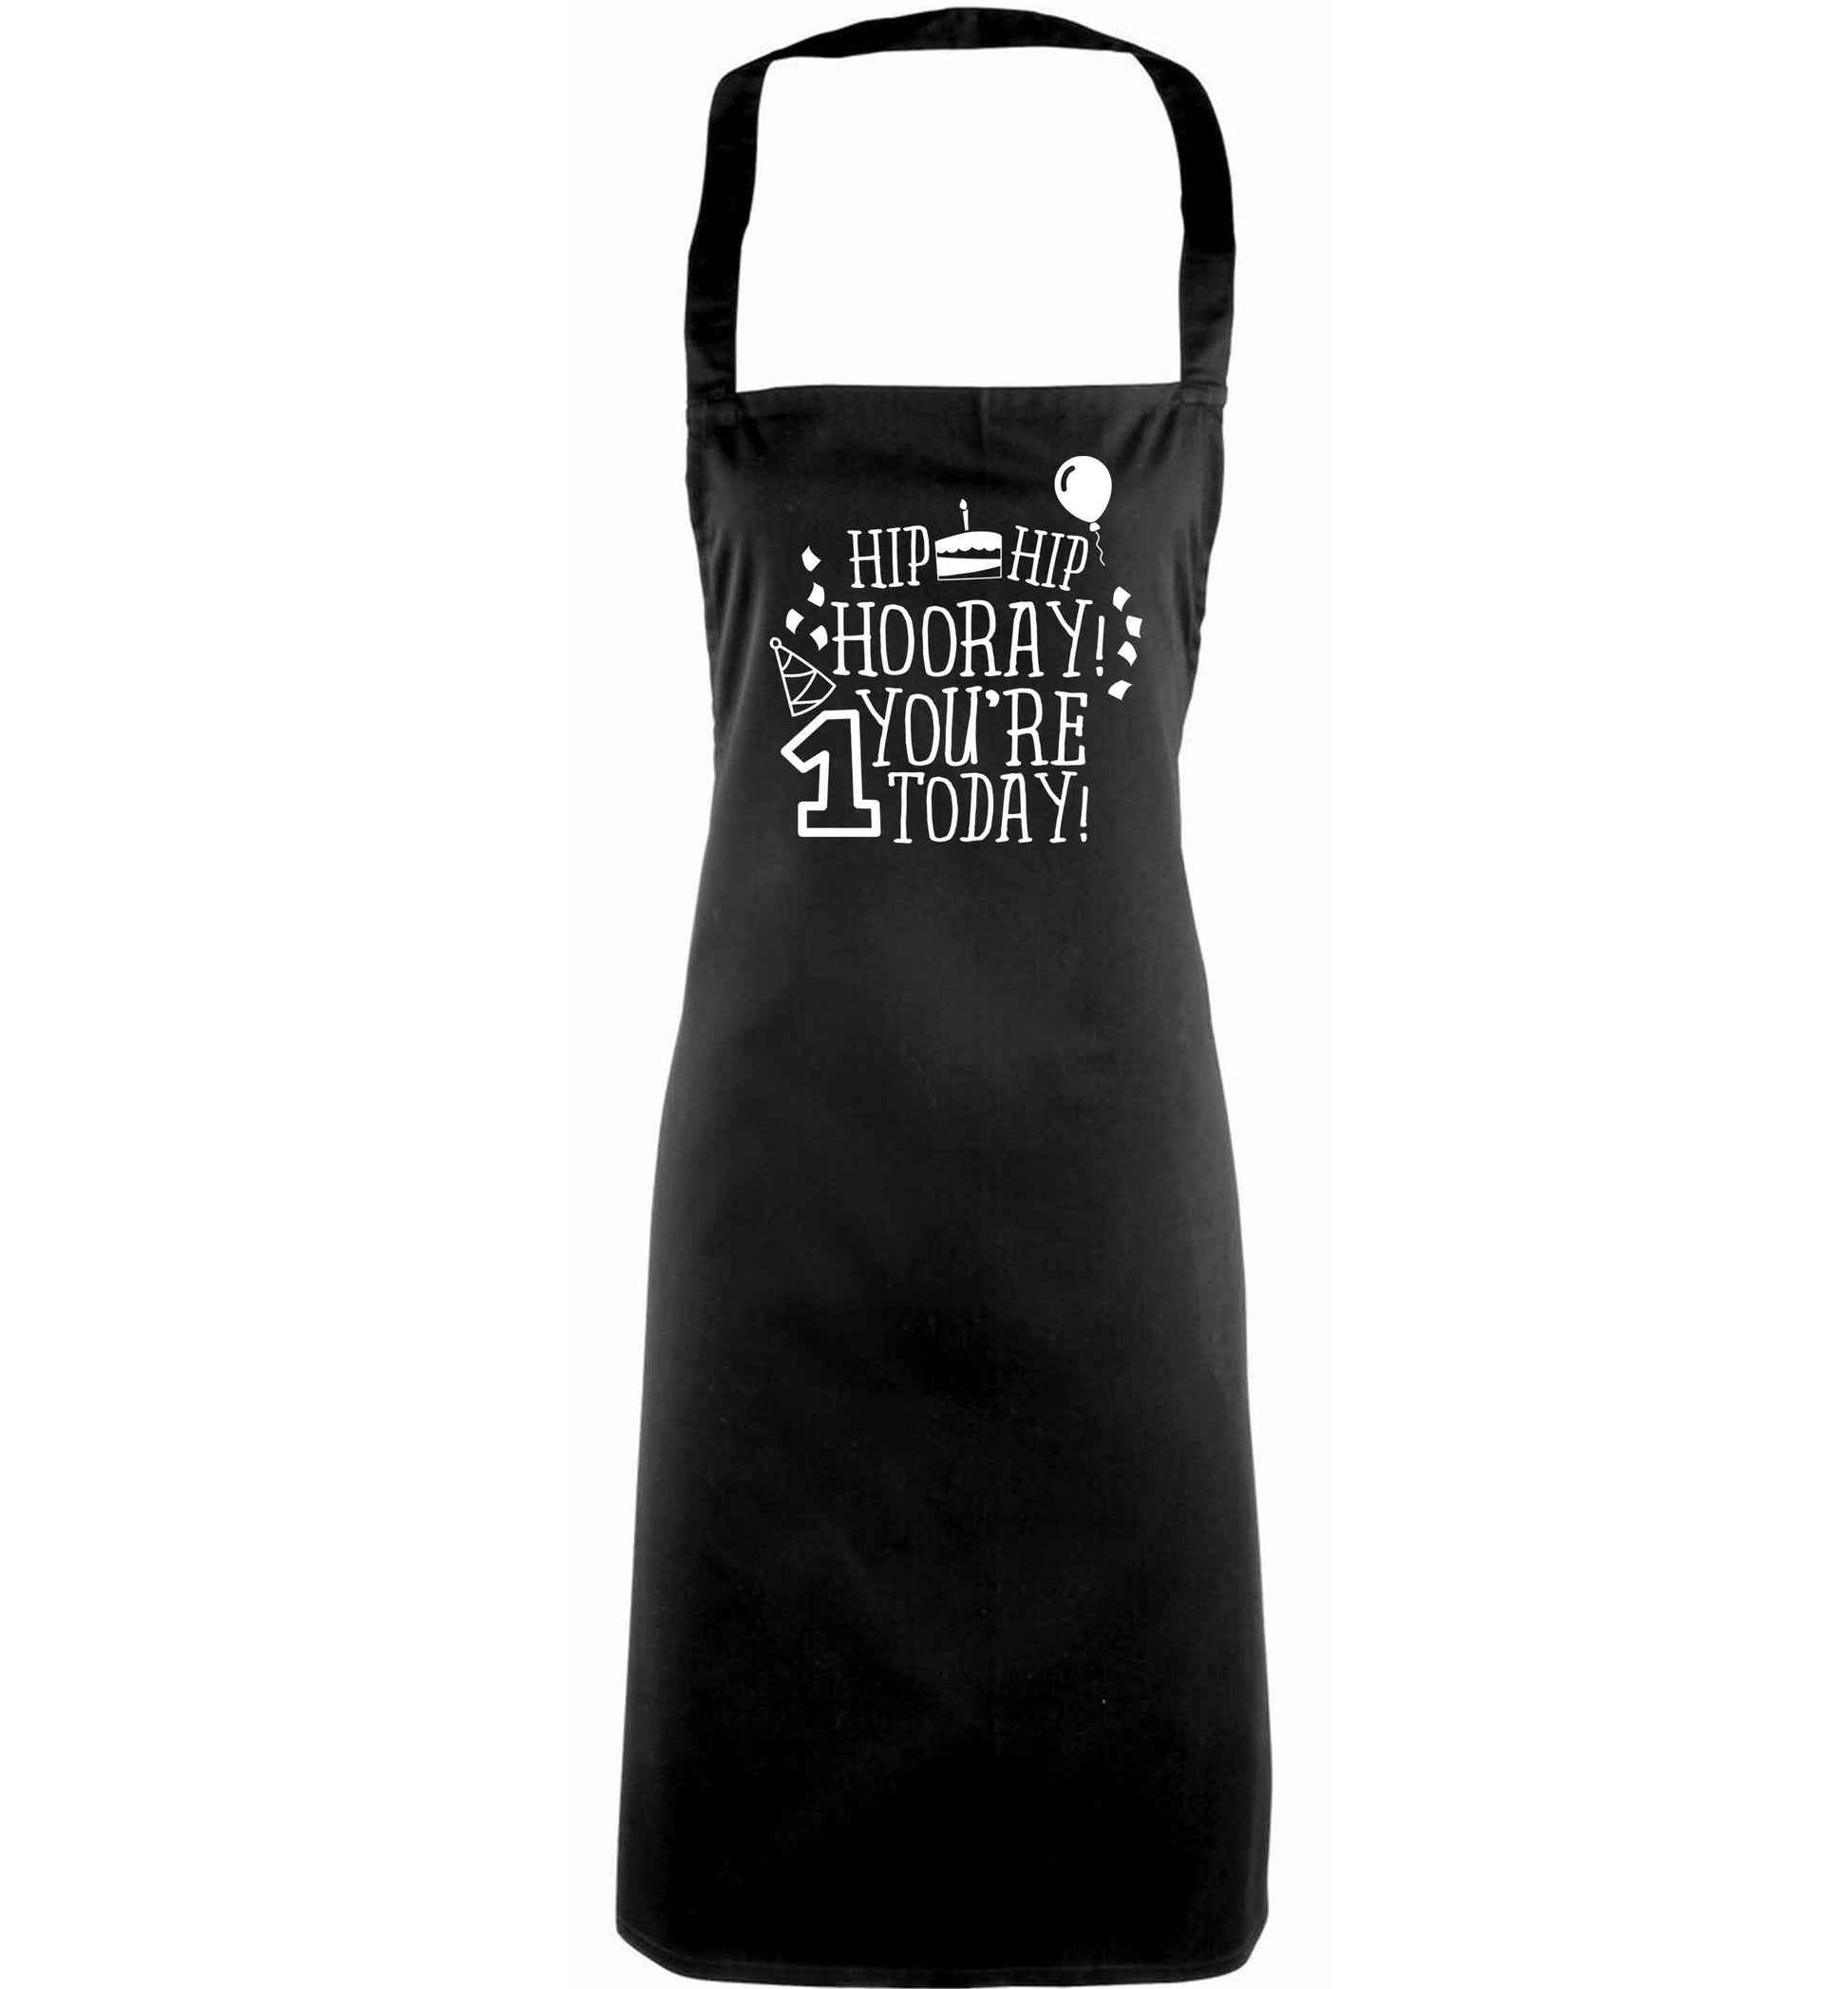 You're one today adults black apron